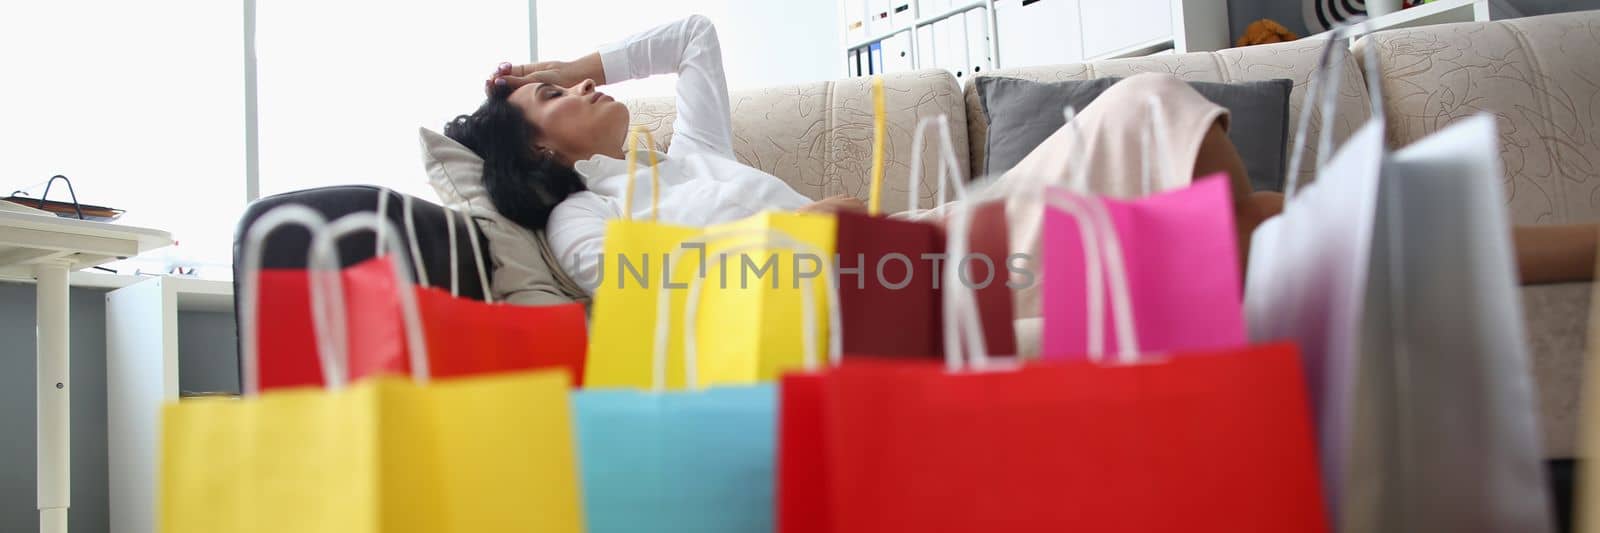 Tired woman sleeping on sofa with bags on floor. Shopping fatigue and stress